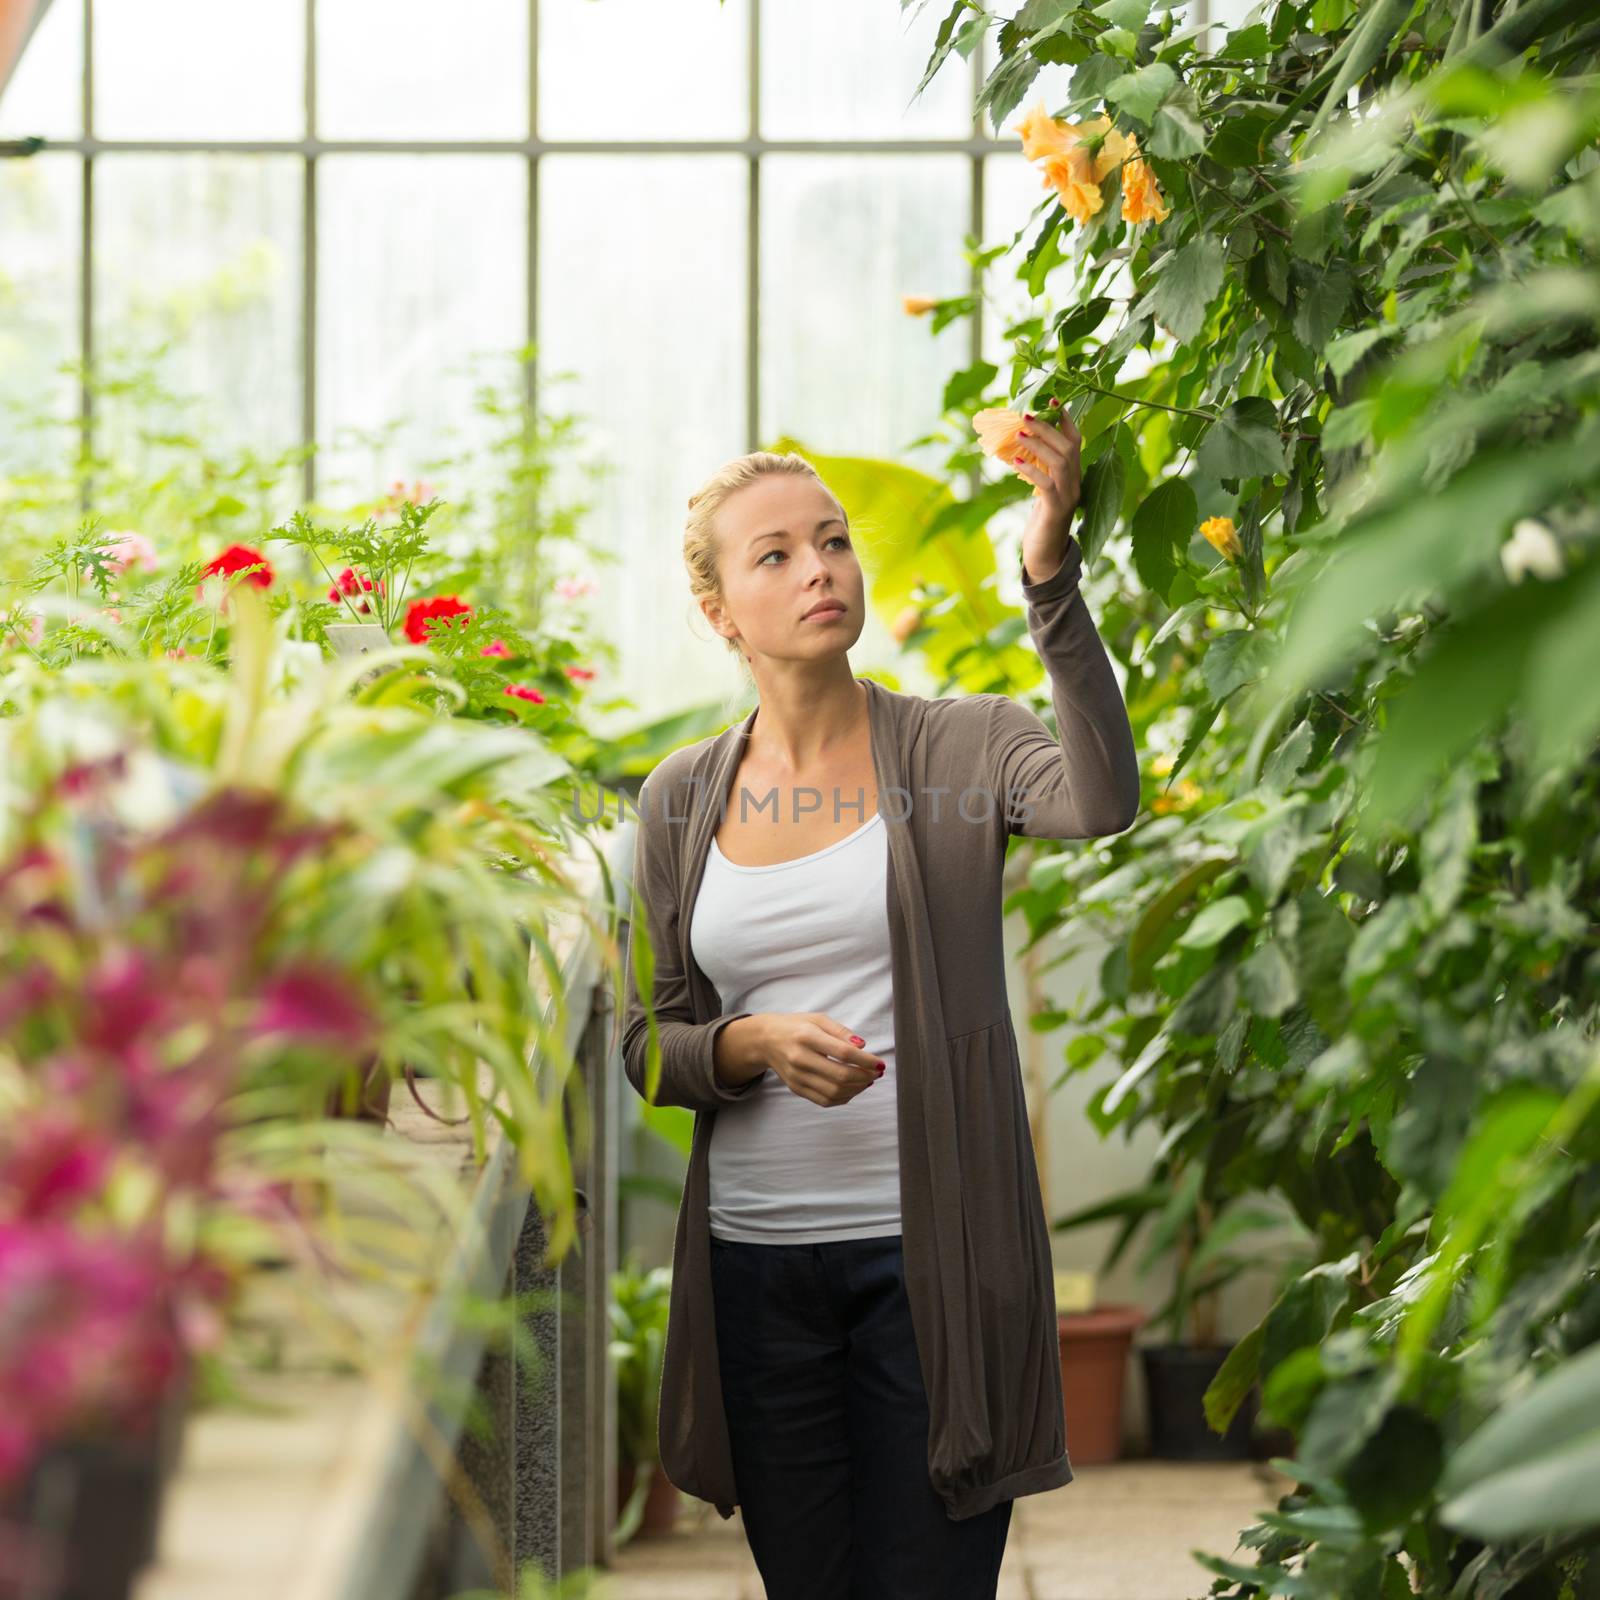 Florists woman working with flowers in a greenhouse. 